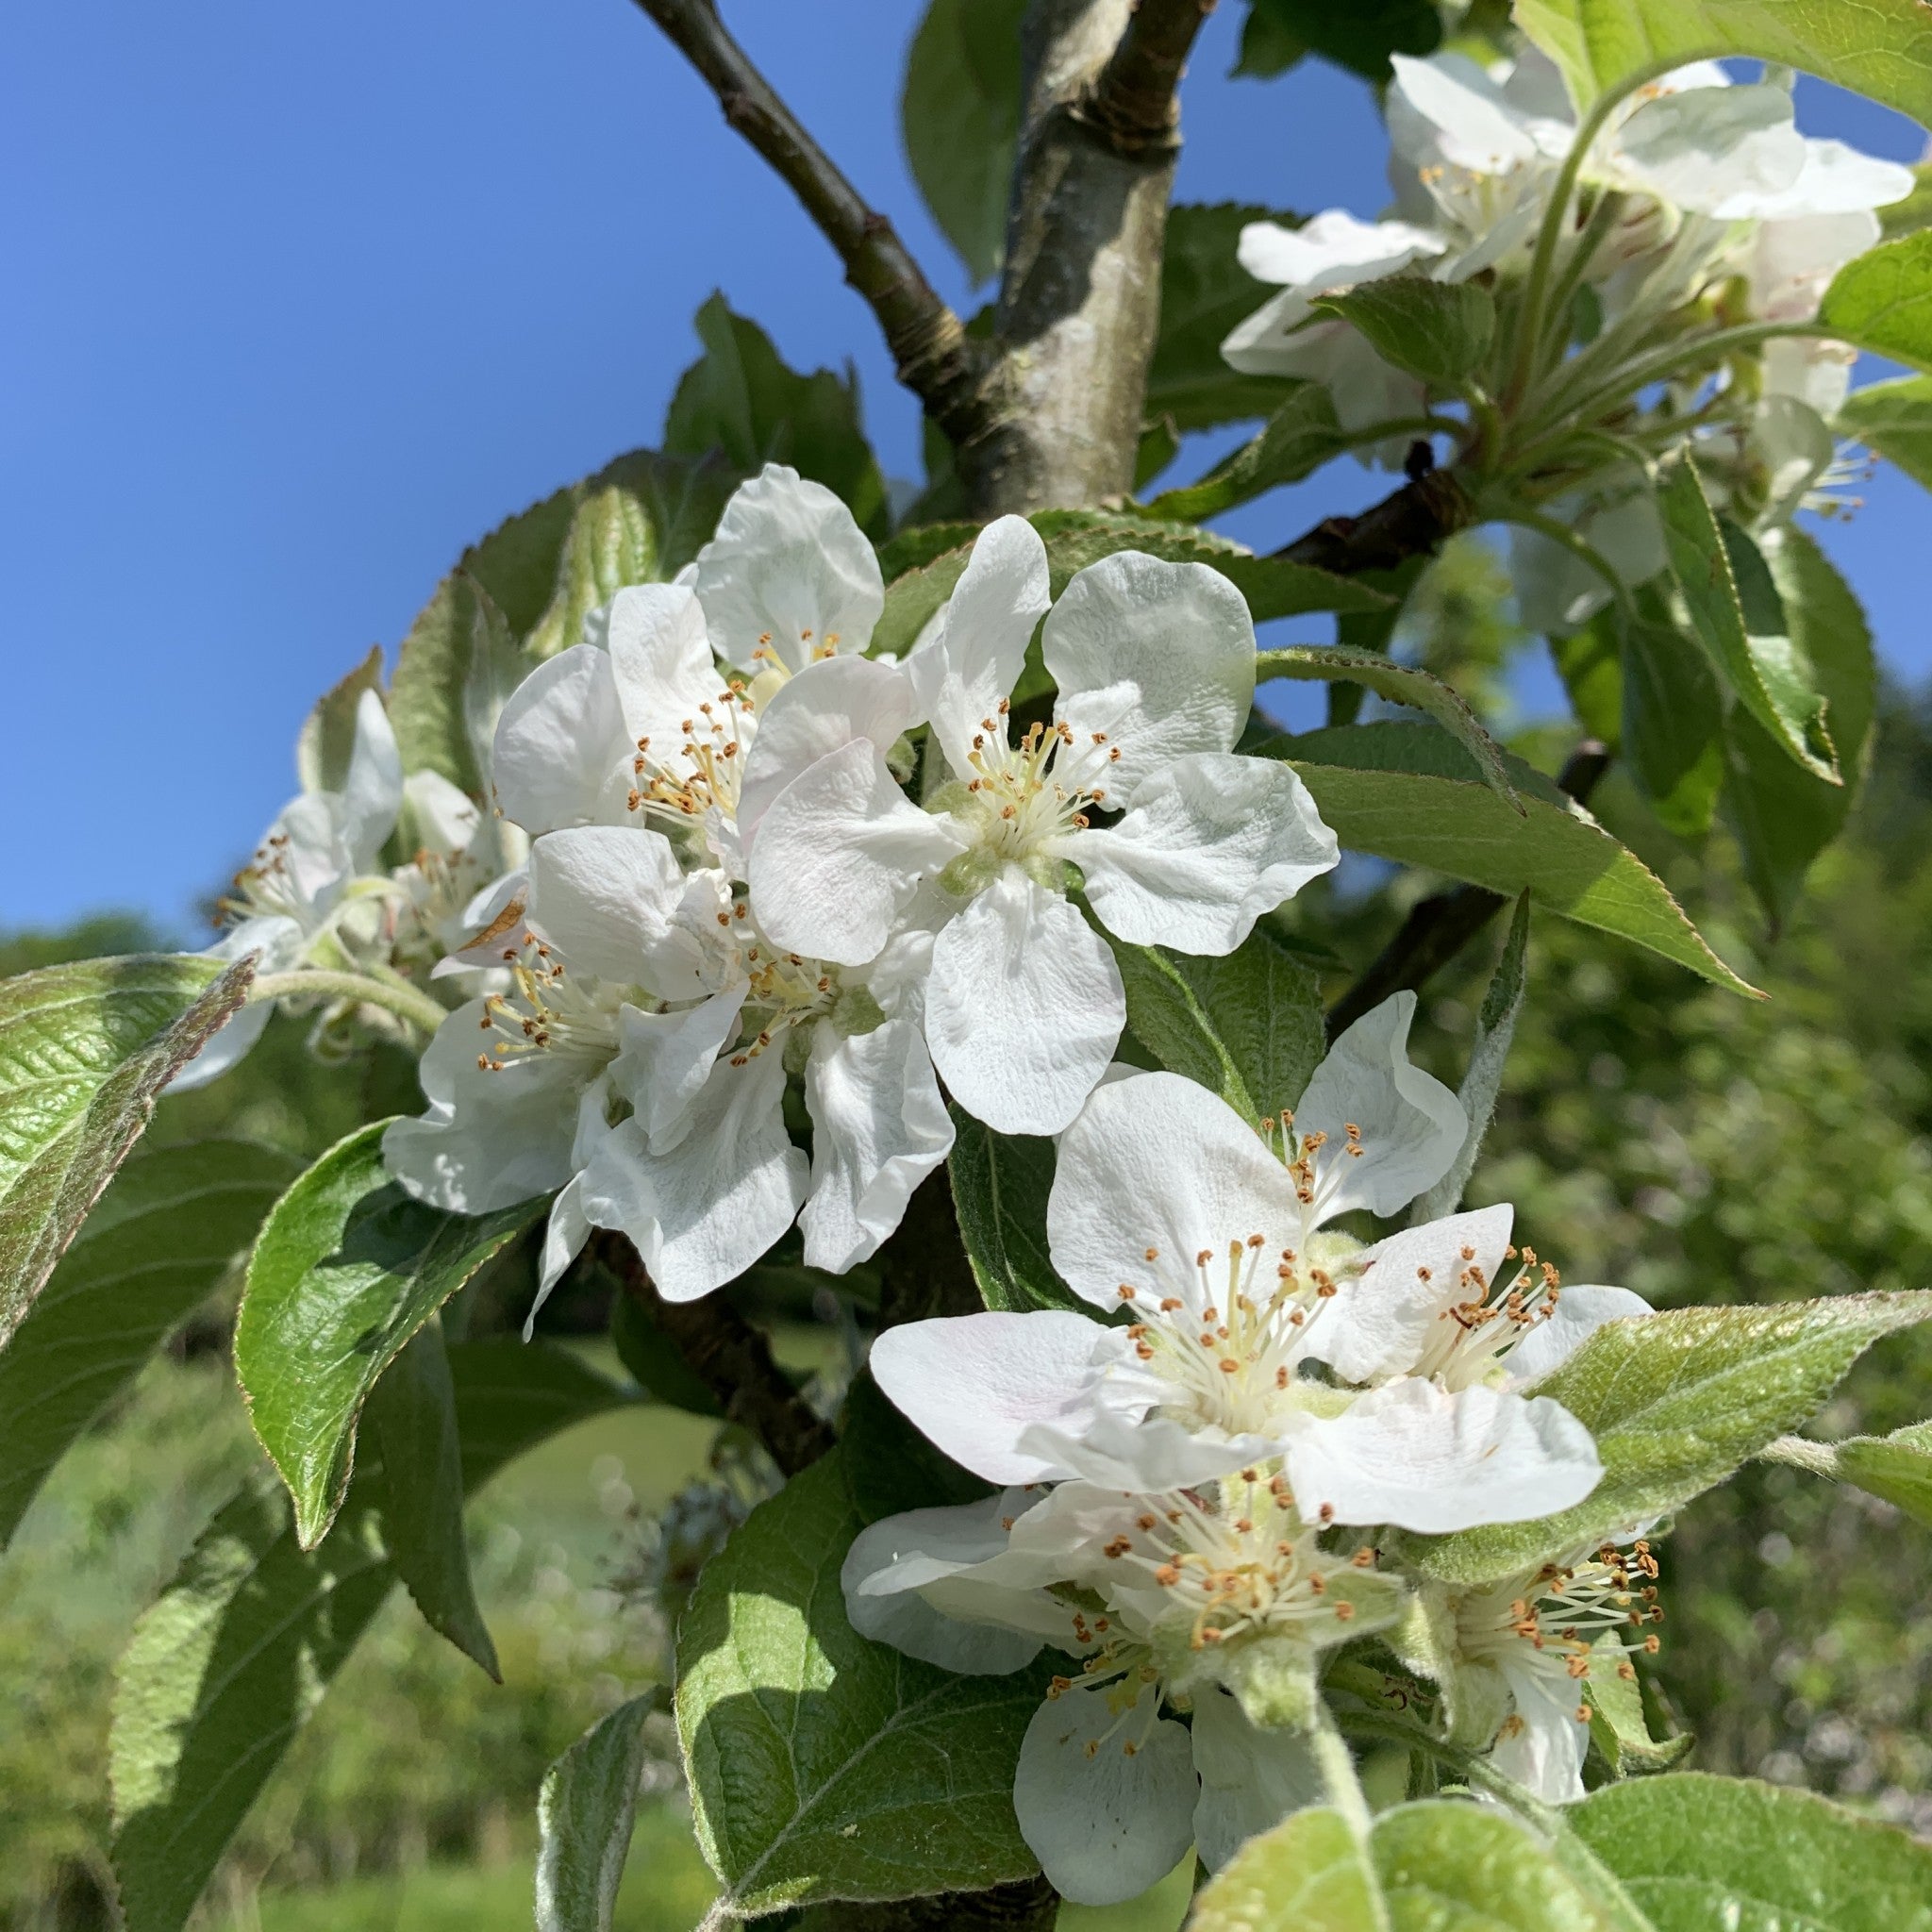 Upright French apple tree blossom